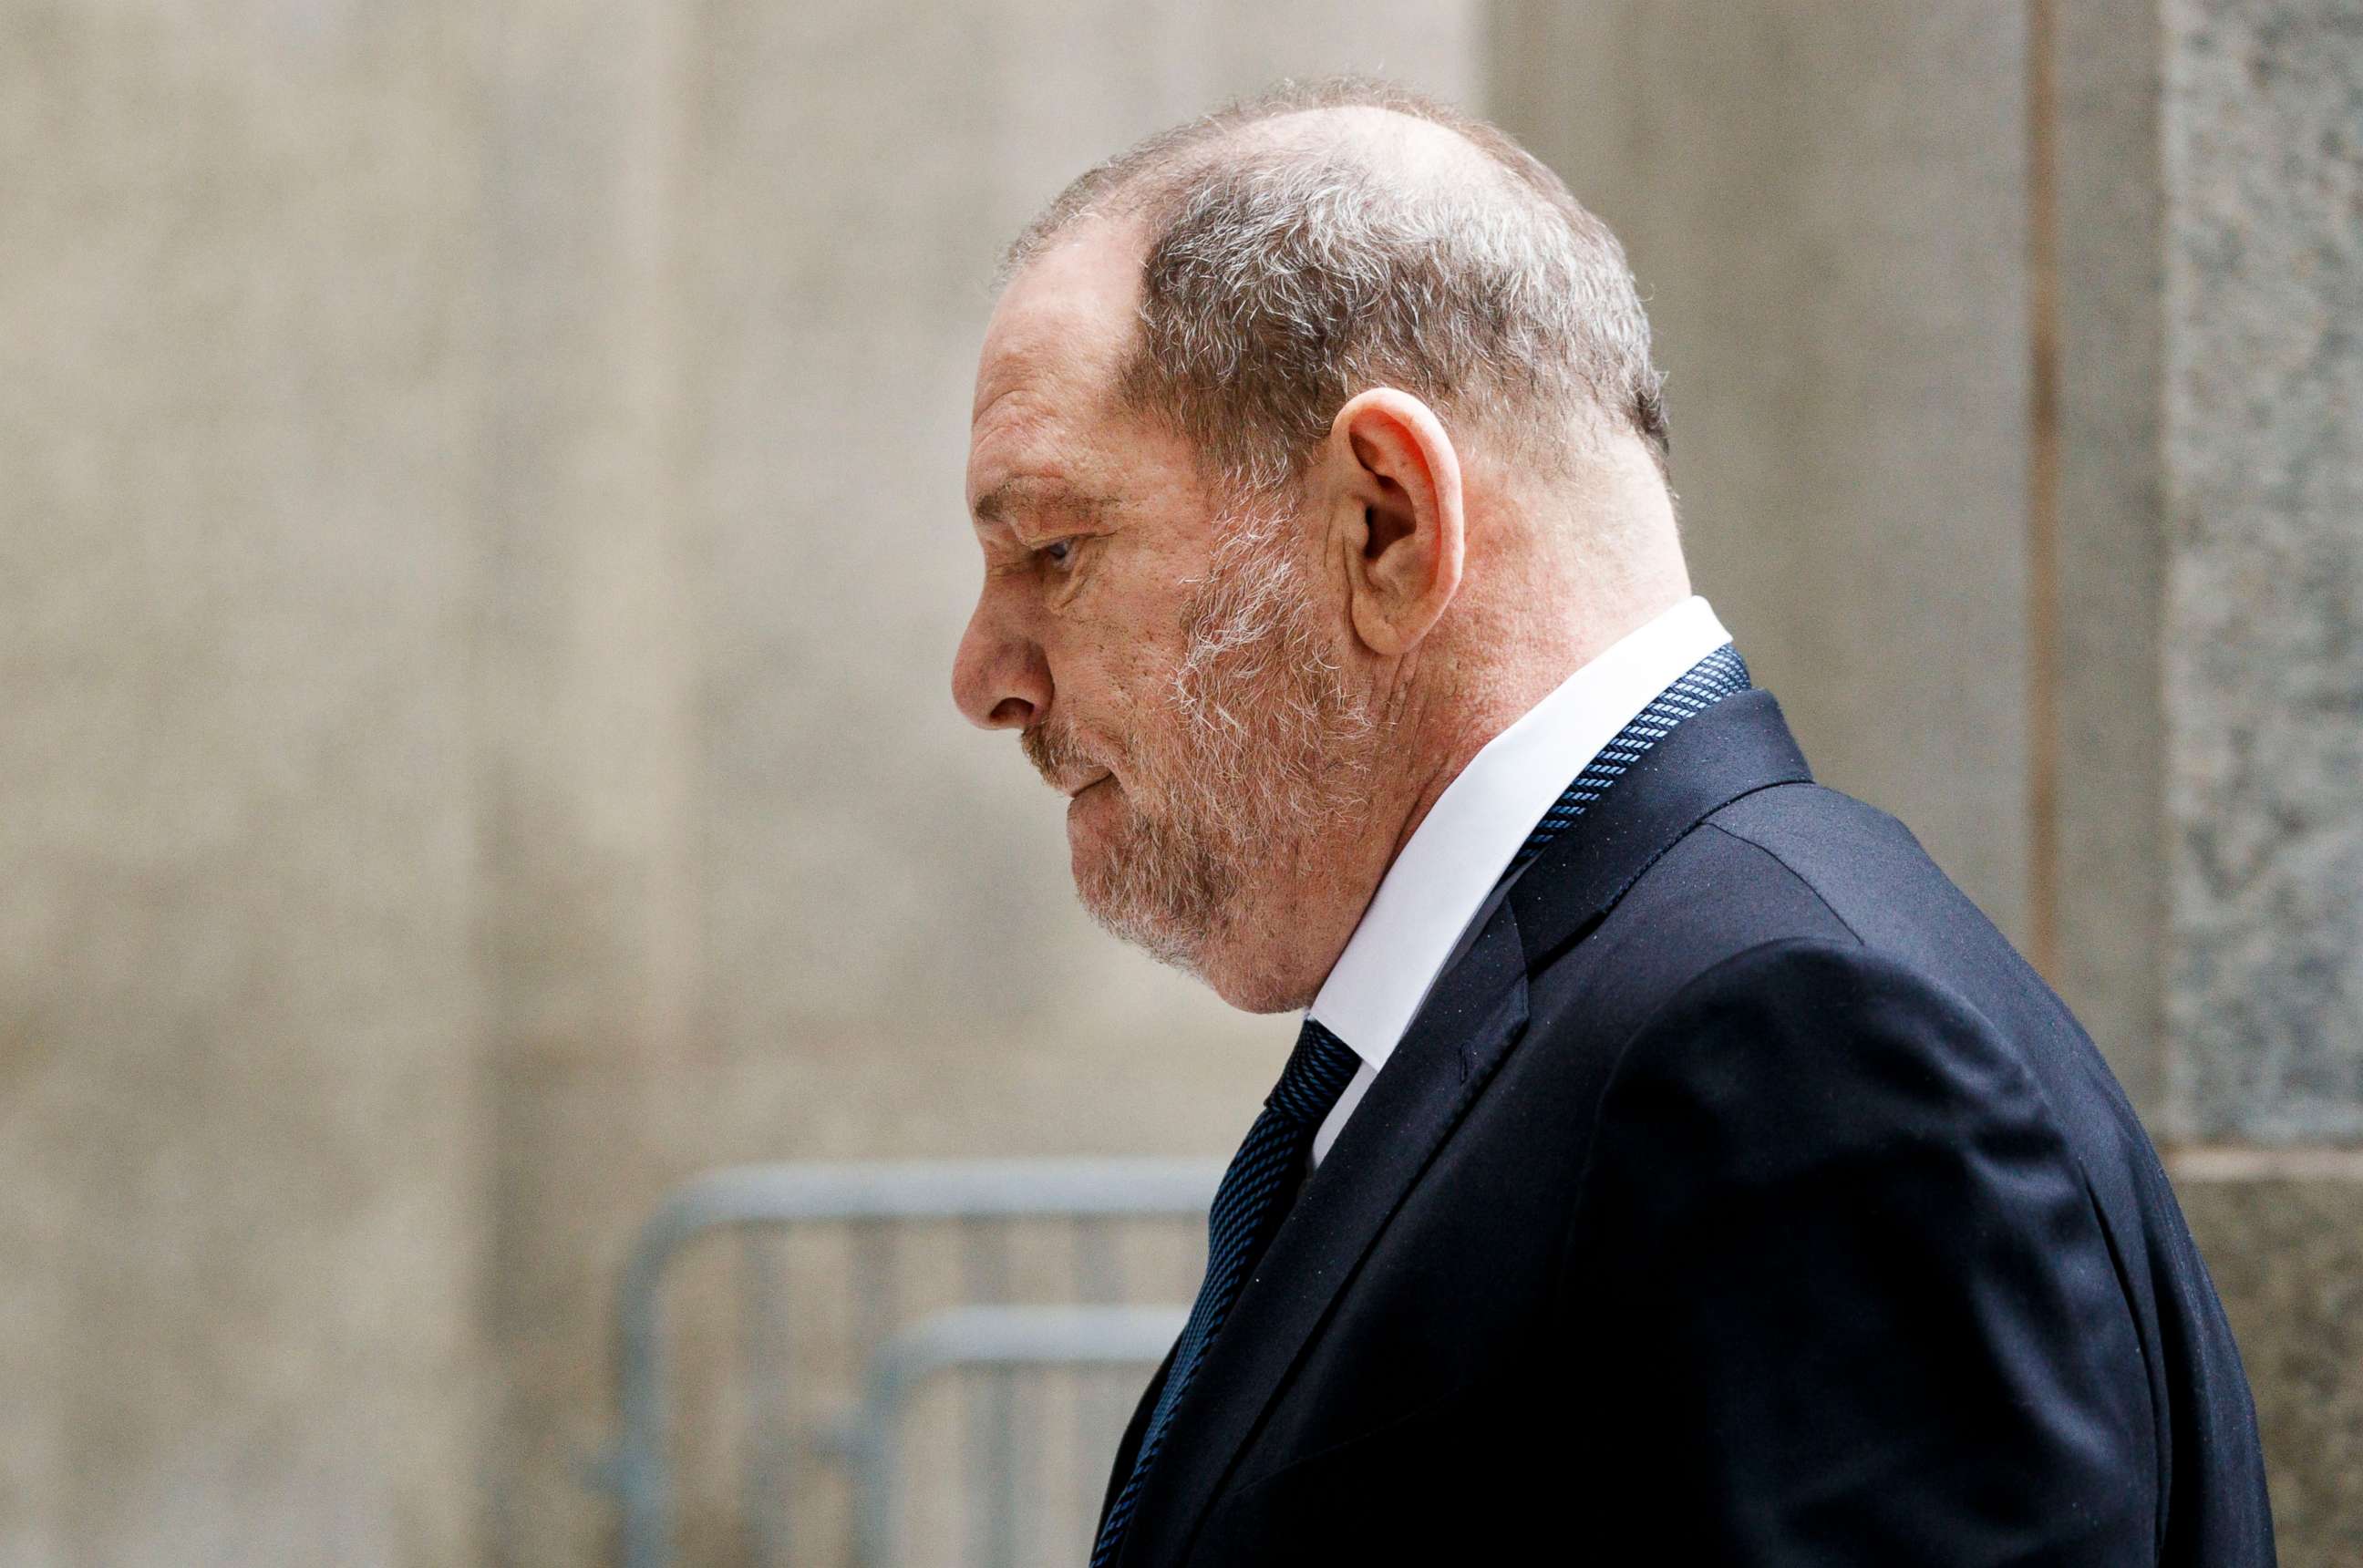 PHOTO: Former movie producer Harvey Weinstein arrives to State Supreme Court for a hearing in his sexual assault case in N.Y., Oct. 11, 2018.